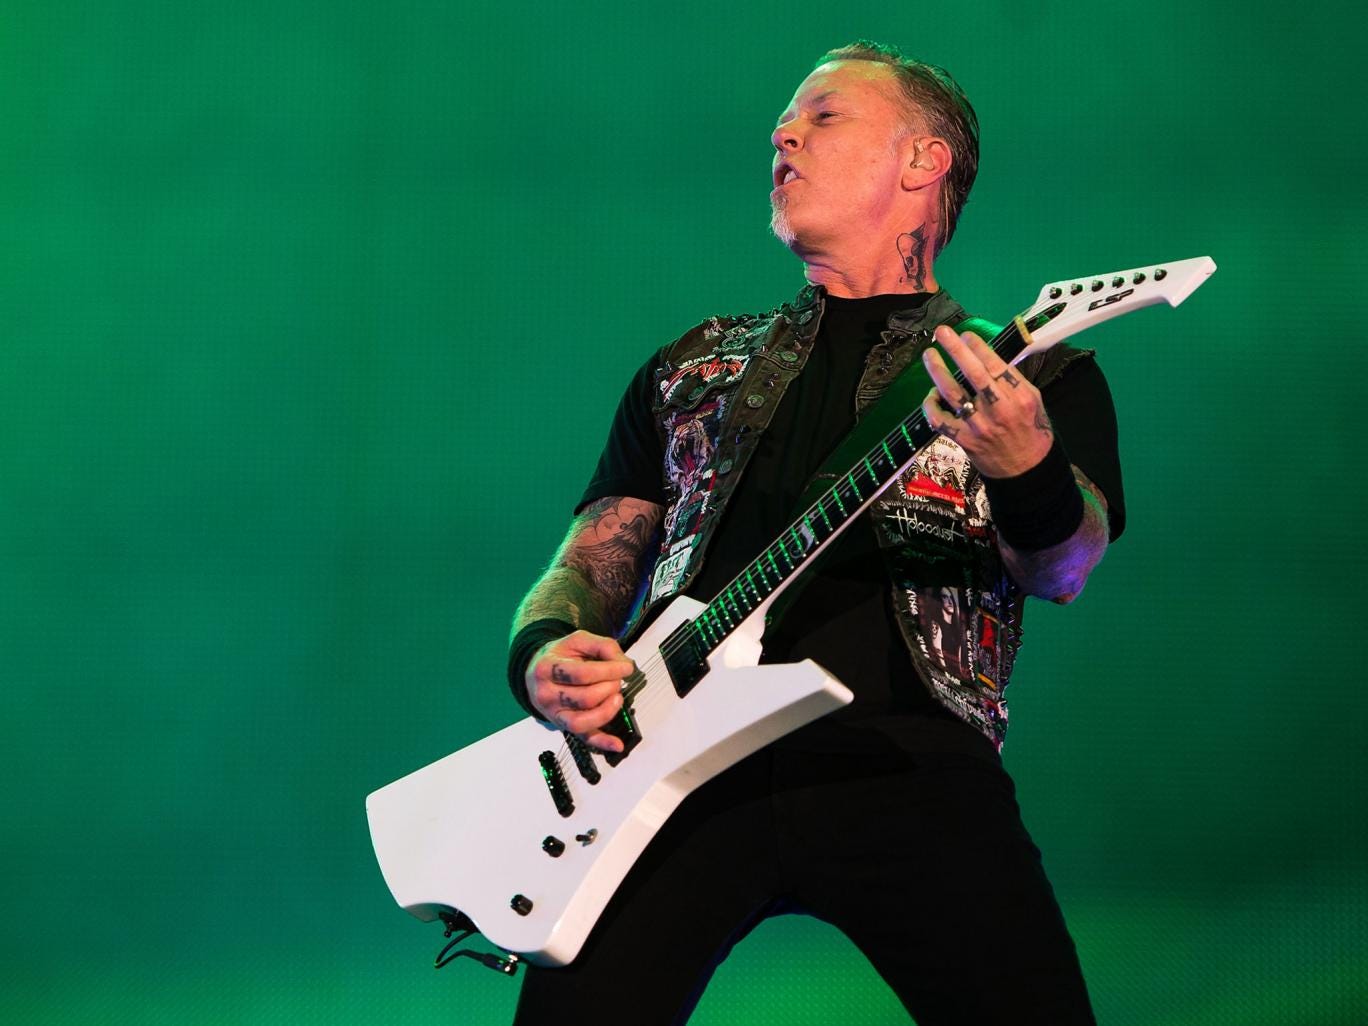  over James Hetfield39;s bearhunting  News  Culture  The Independent